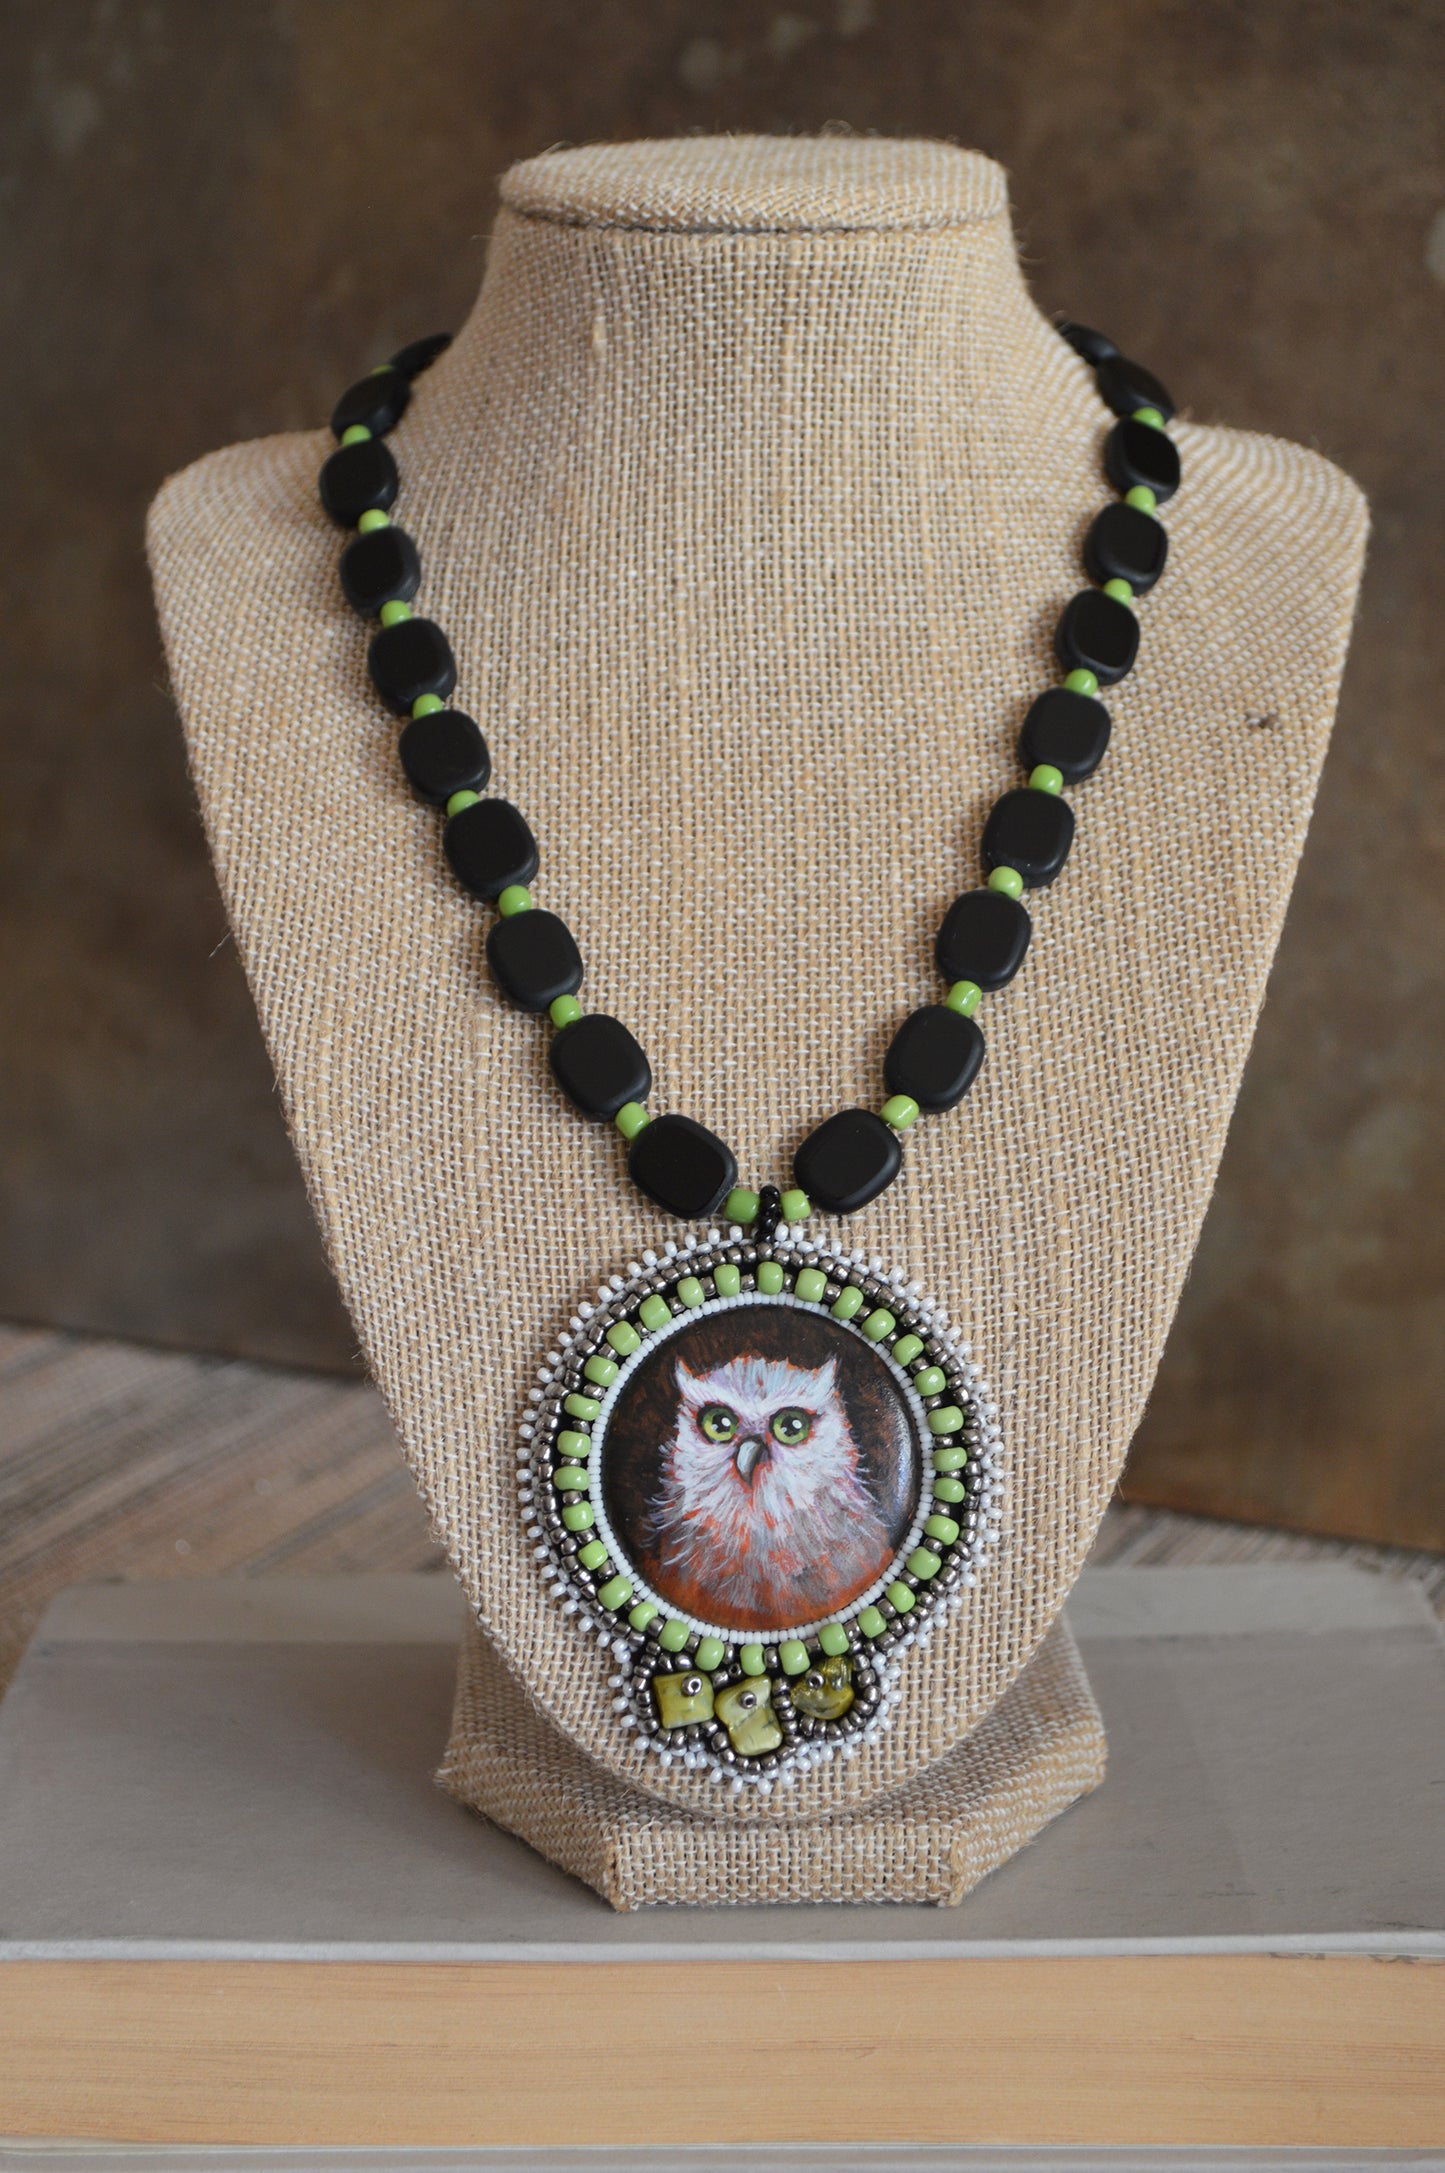 Owl necklace / One of a kind huge bead embroidery statement jewelry